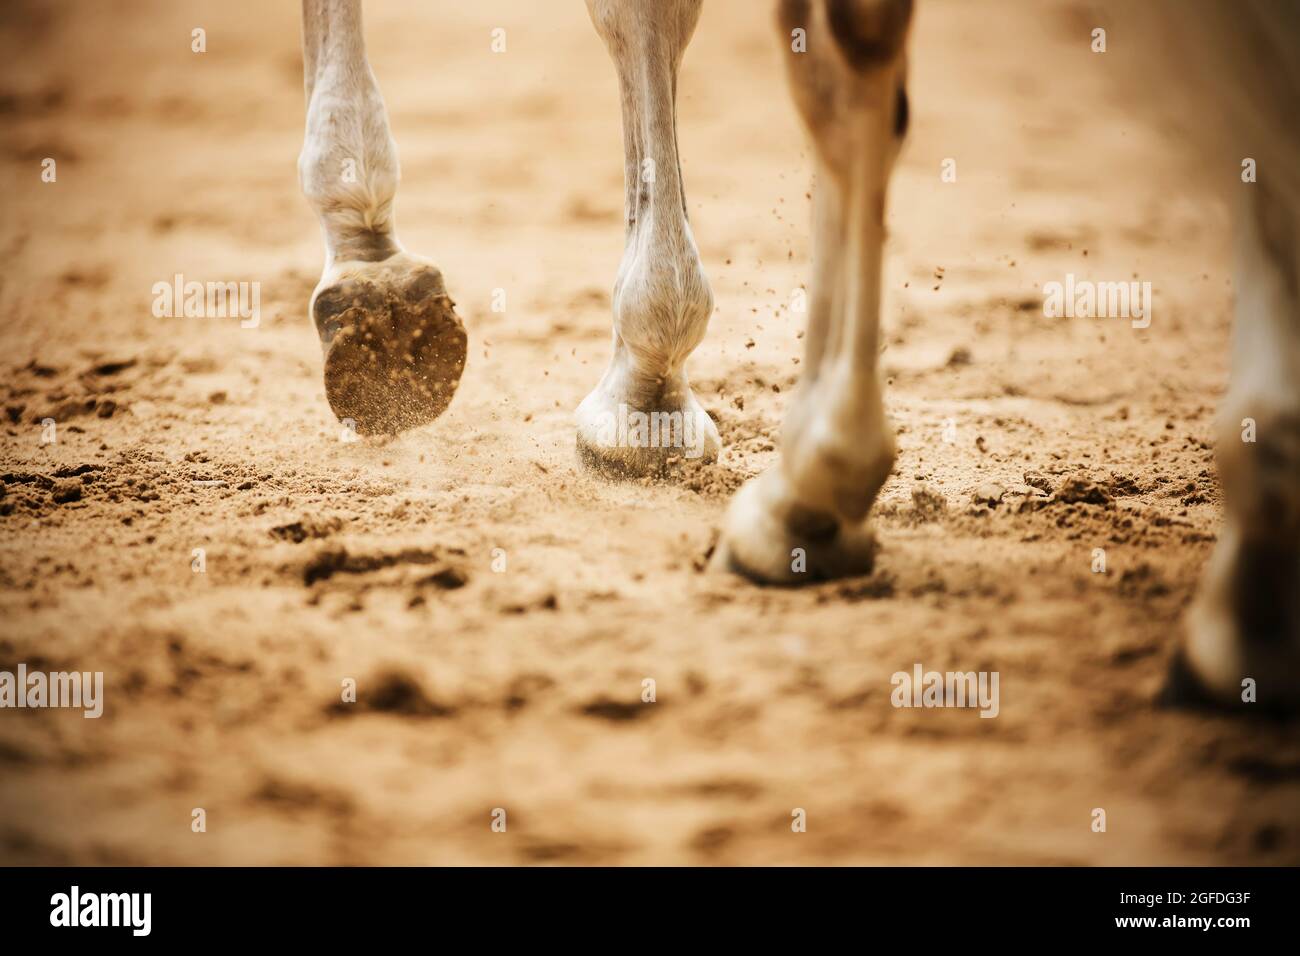 A gray horse walks through the arena, stepping with unshod hooves on the sand and kicking up dust with them. Equestrian sports. Horse riding. Stock Photo